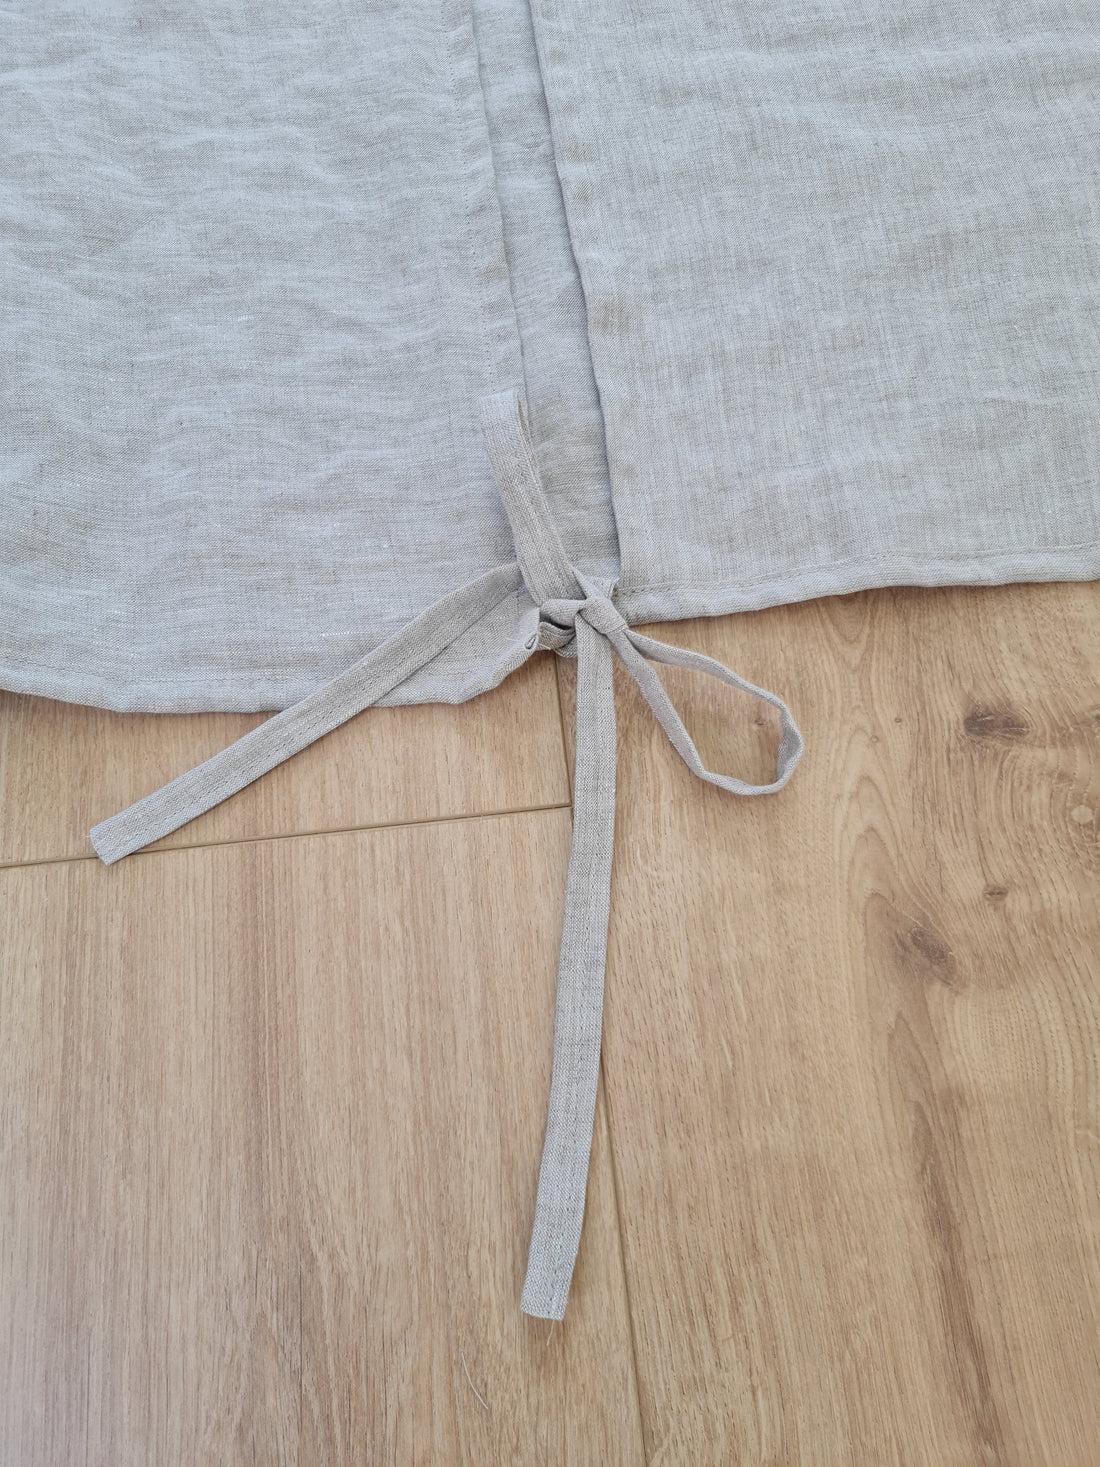 Linen Single Sleeping Bag Liner with Zipper for Camping Hiking Hostel Travel non-dyed linen fabric custom made